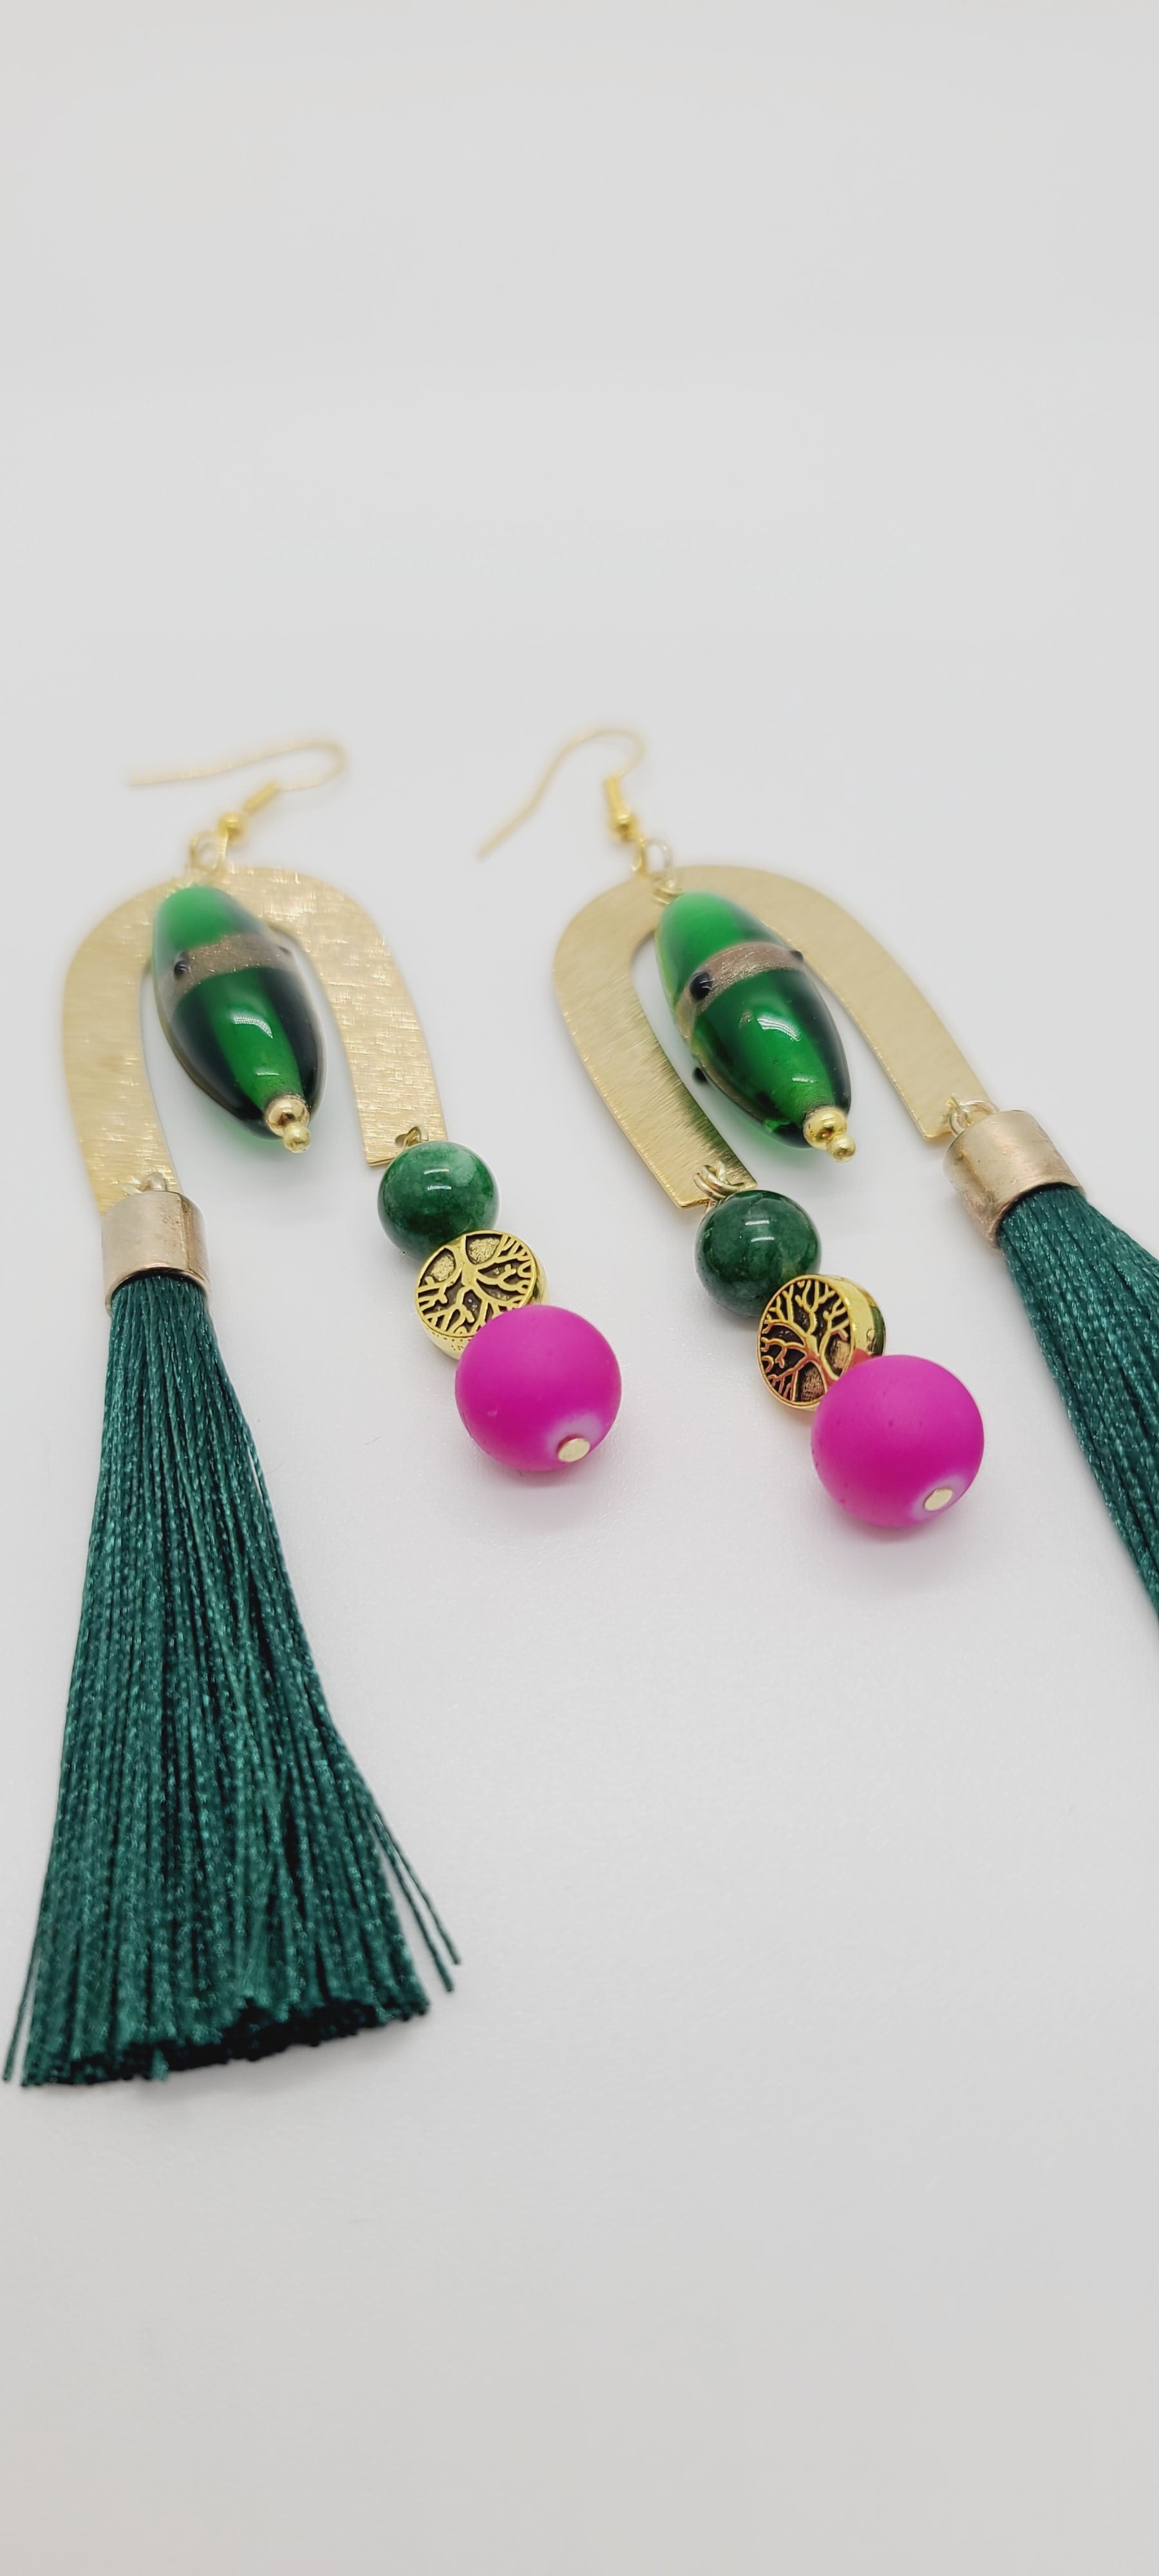 Length: 4.5 inches | Weight: 0.8 ounces  Distinctly You! These earrings are made with gold U-shape charms, green lampwork glass beads, 10mm hot pink resin beads, 8mm green Agate beads, gold tree charms, and green tassels.